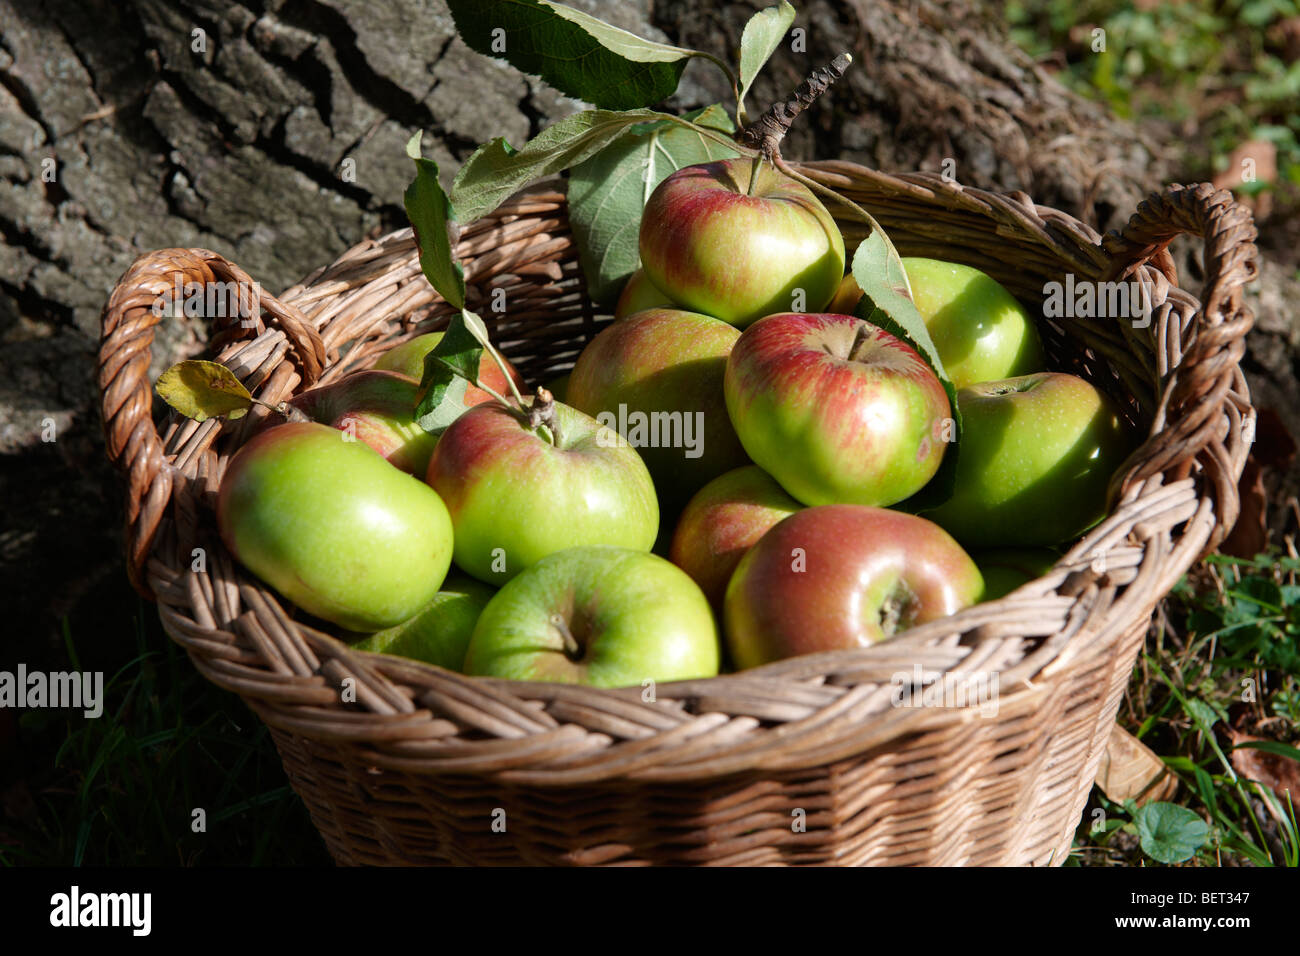 Fresh organic apples harvested in a basket in an apple orchard Stock Photo